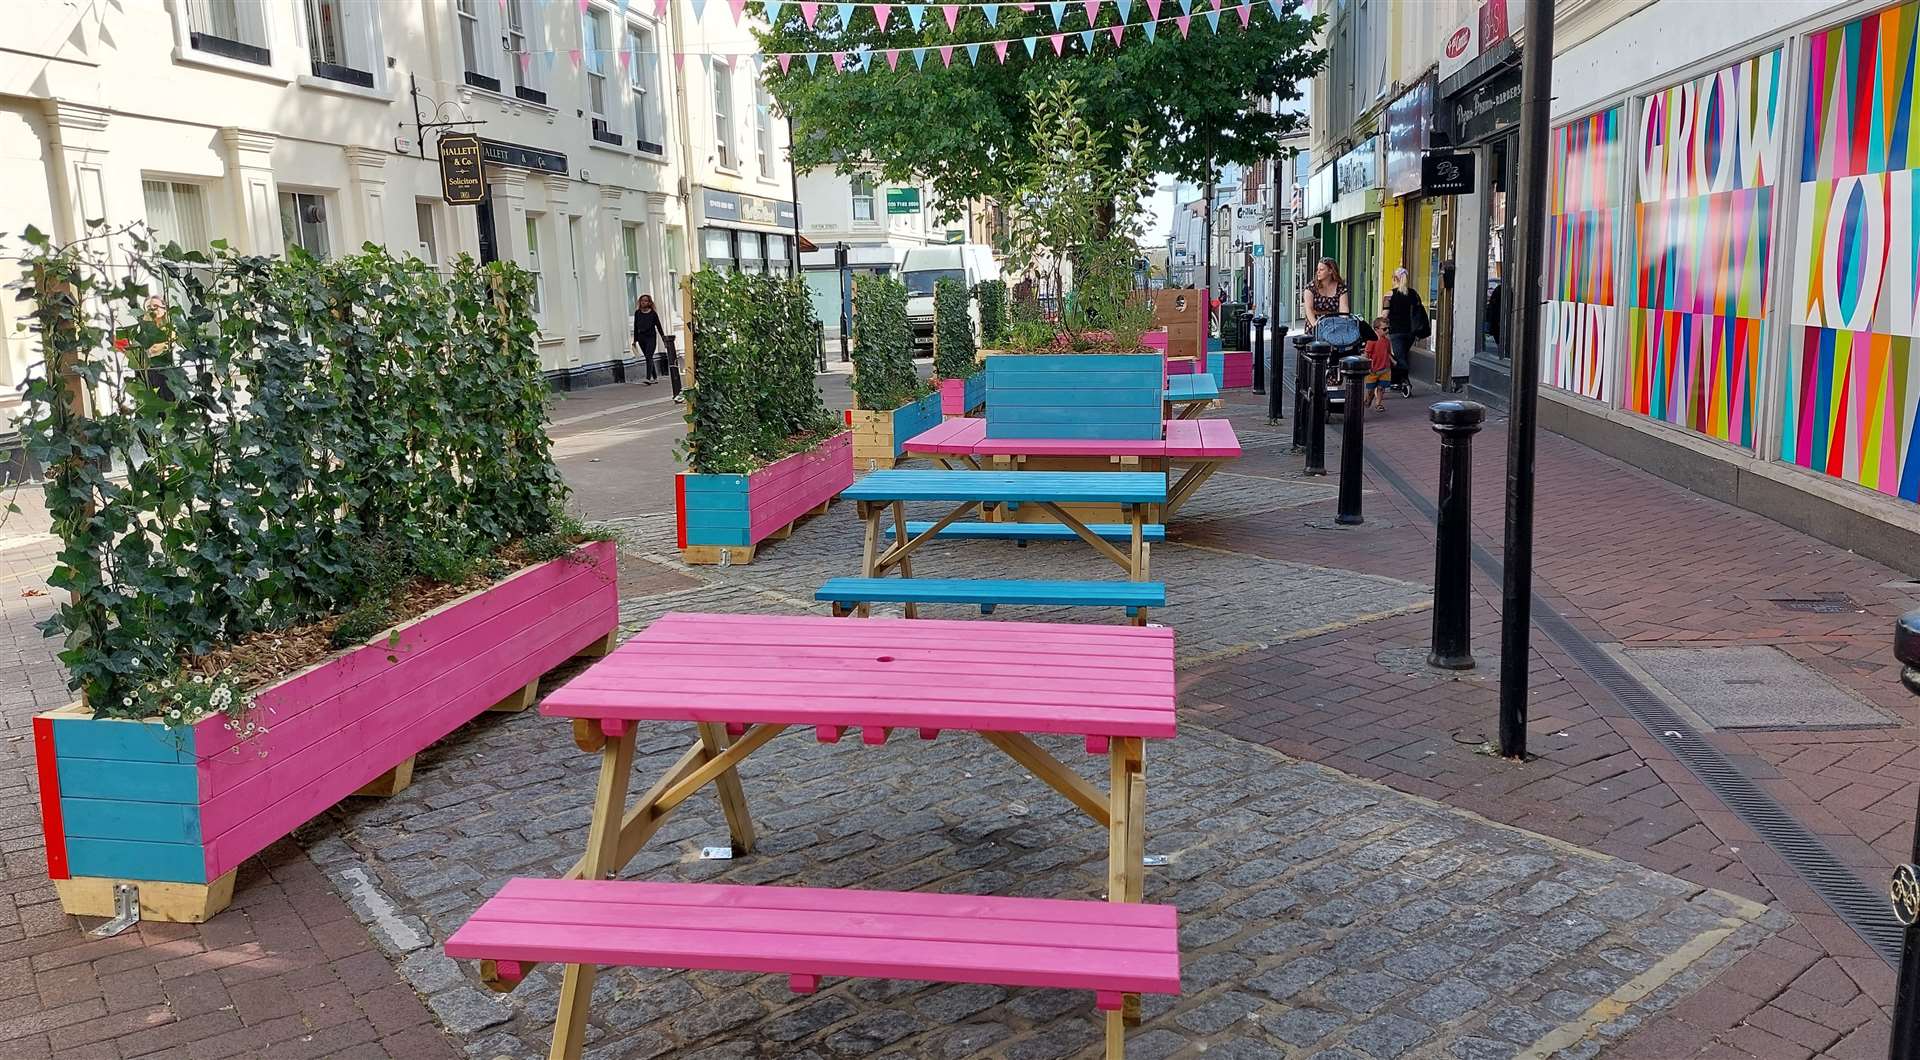 Colourful new benches appeared in Bank Street this week